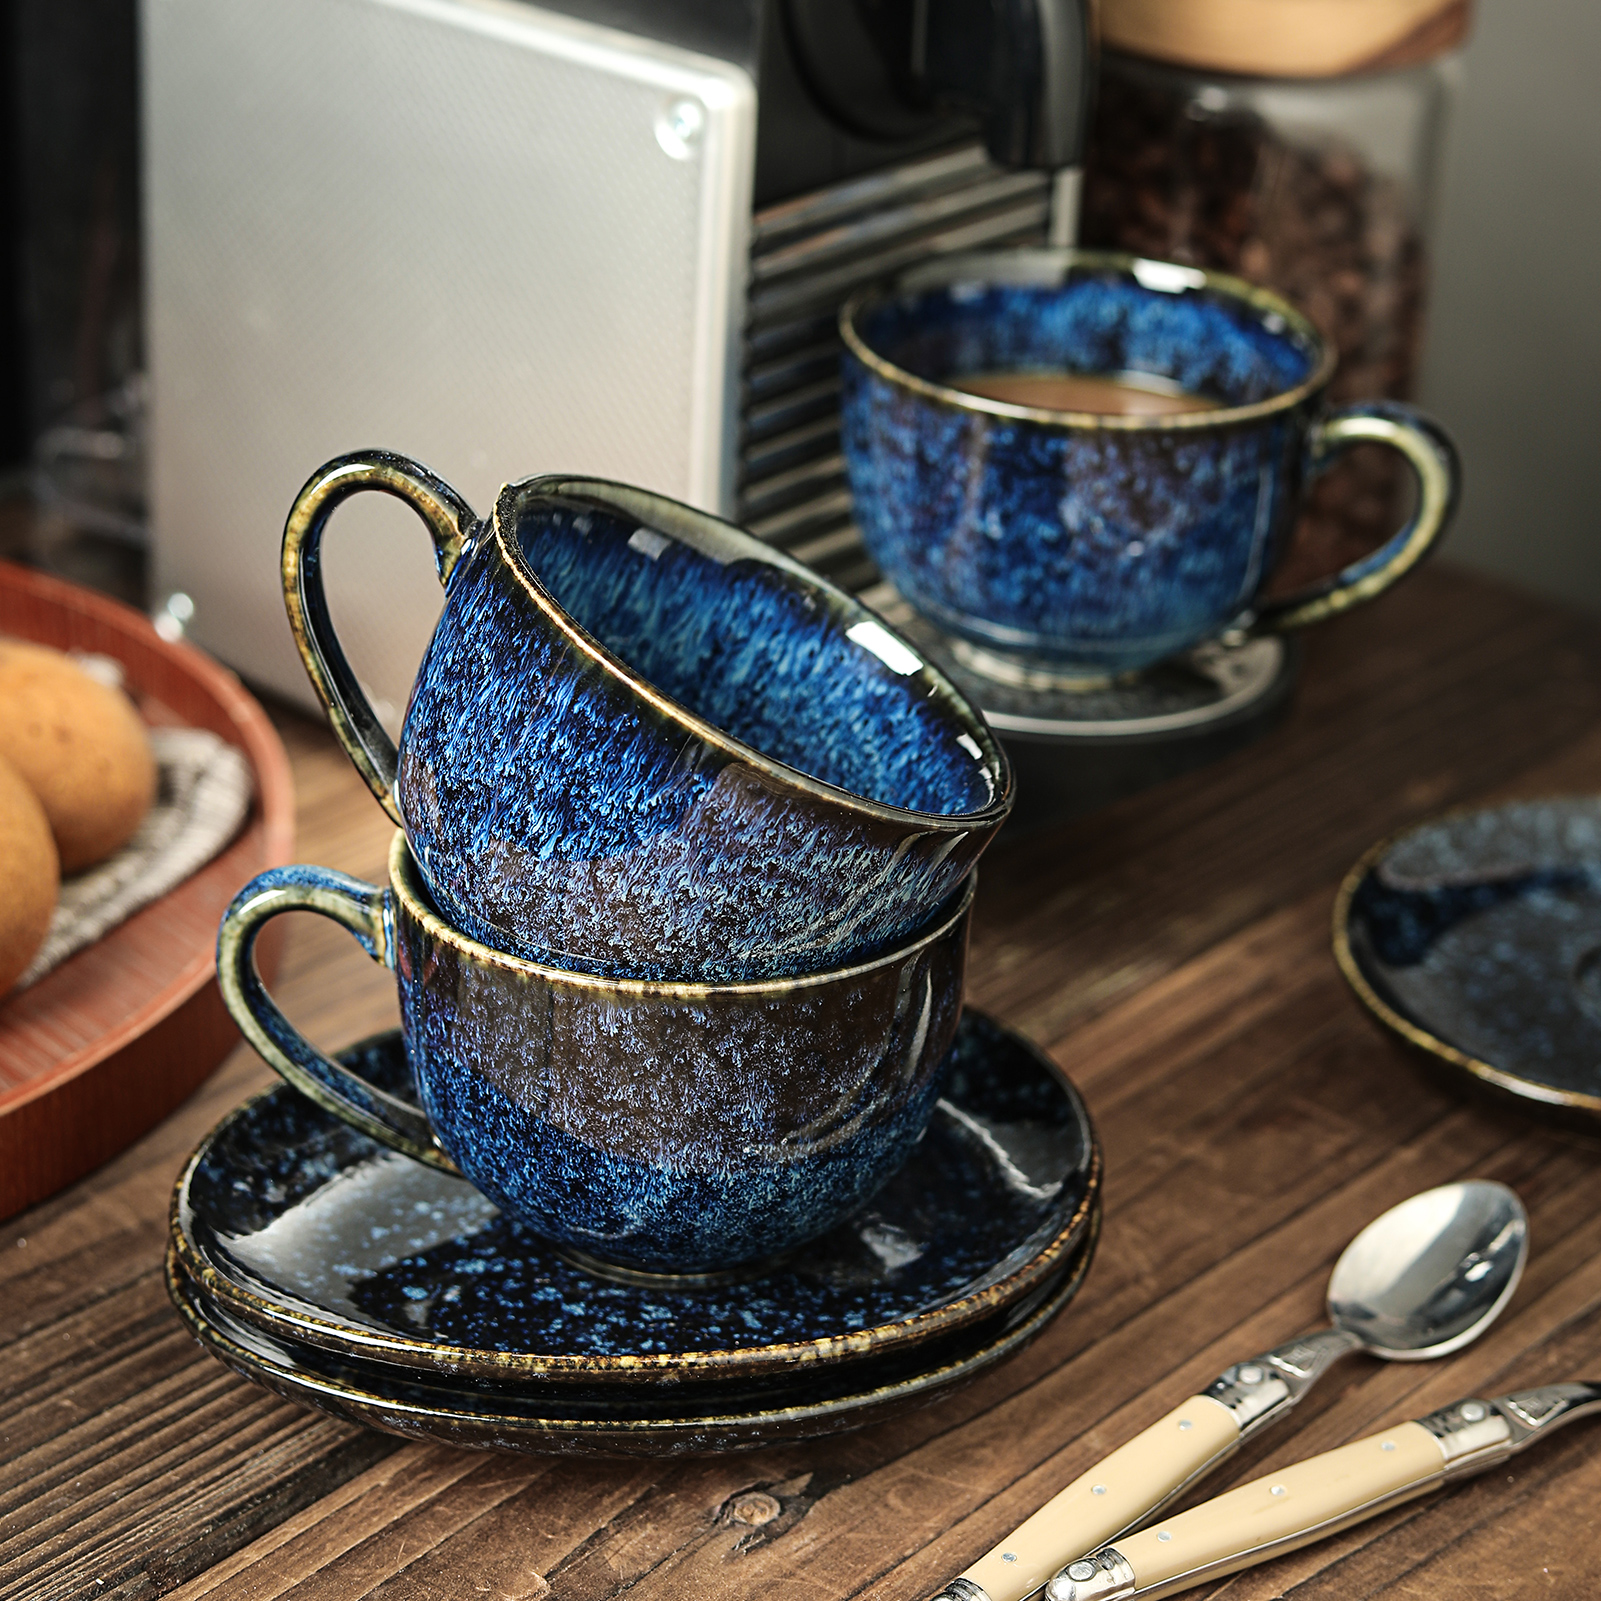 vicrays Ceramic Espresso Coffee Cups - 4 oz Porcelain Cappuccino Cups Set with Saucers Spoons and Metal Stand for Tea Cafe